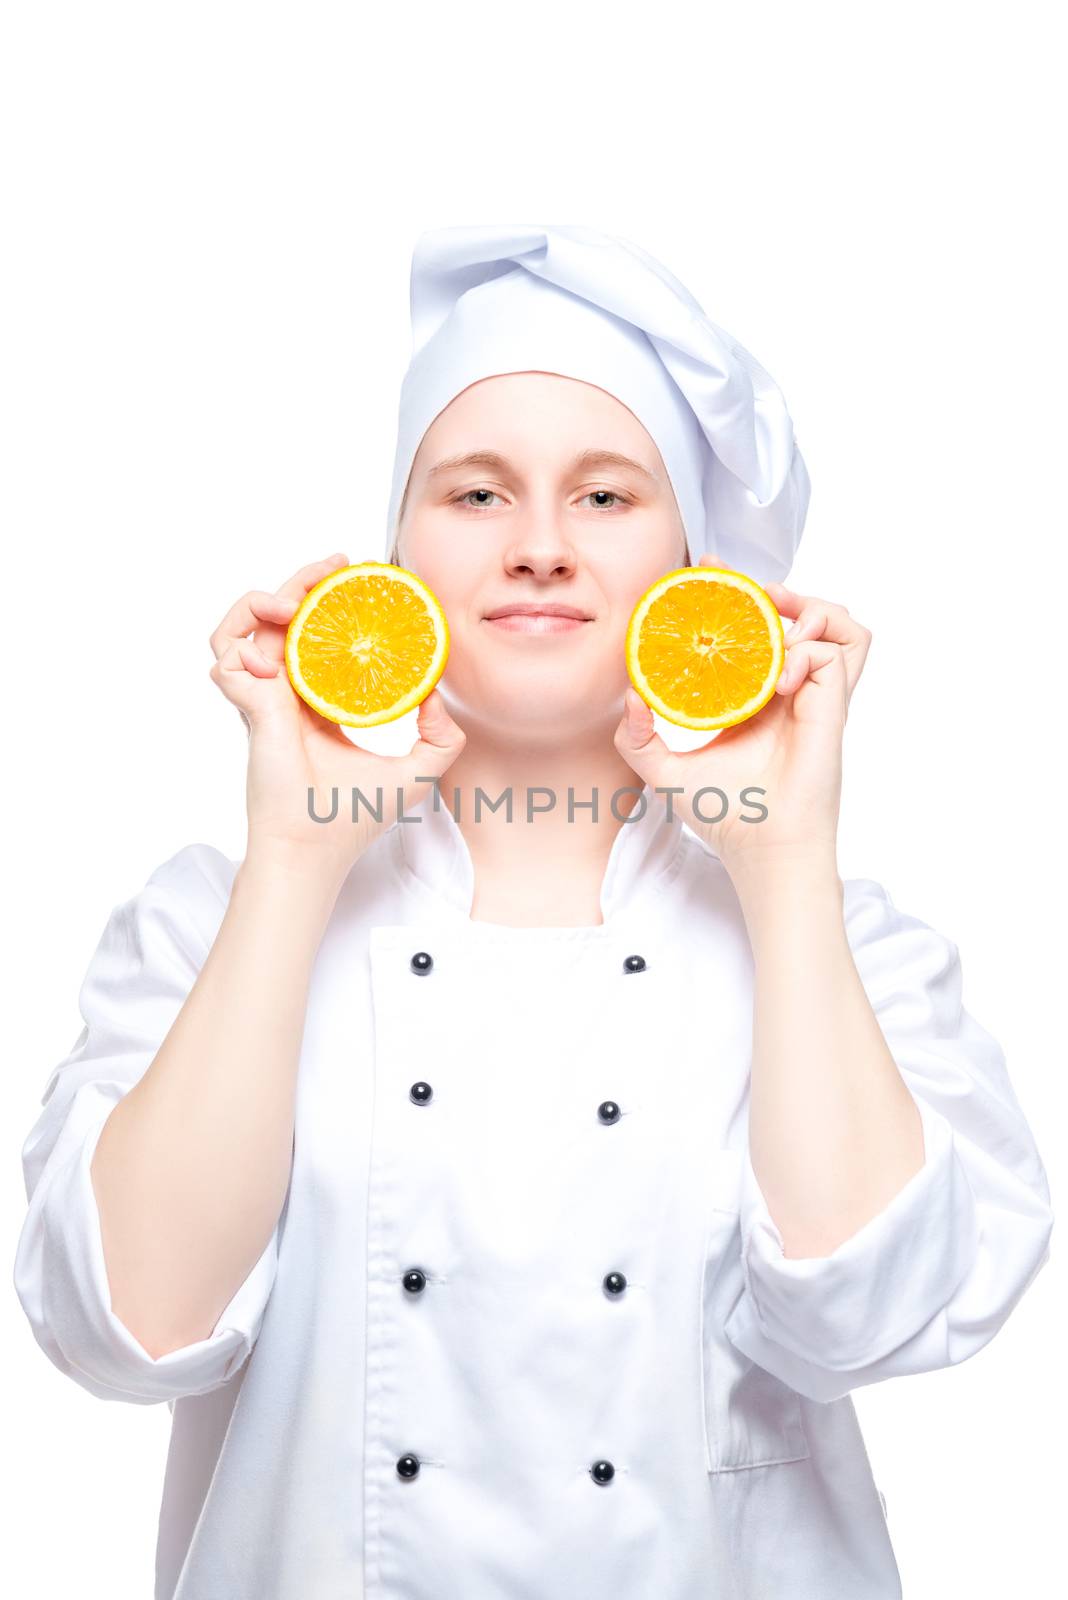 chef posing with oranges on a white background isolated by kosmsos111